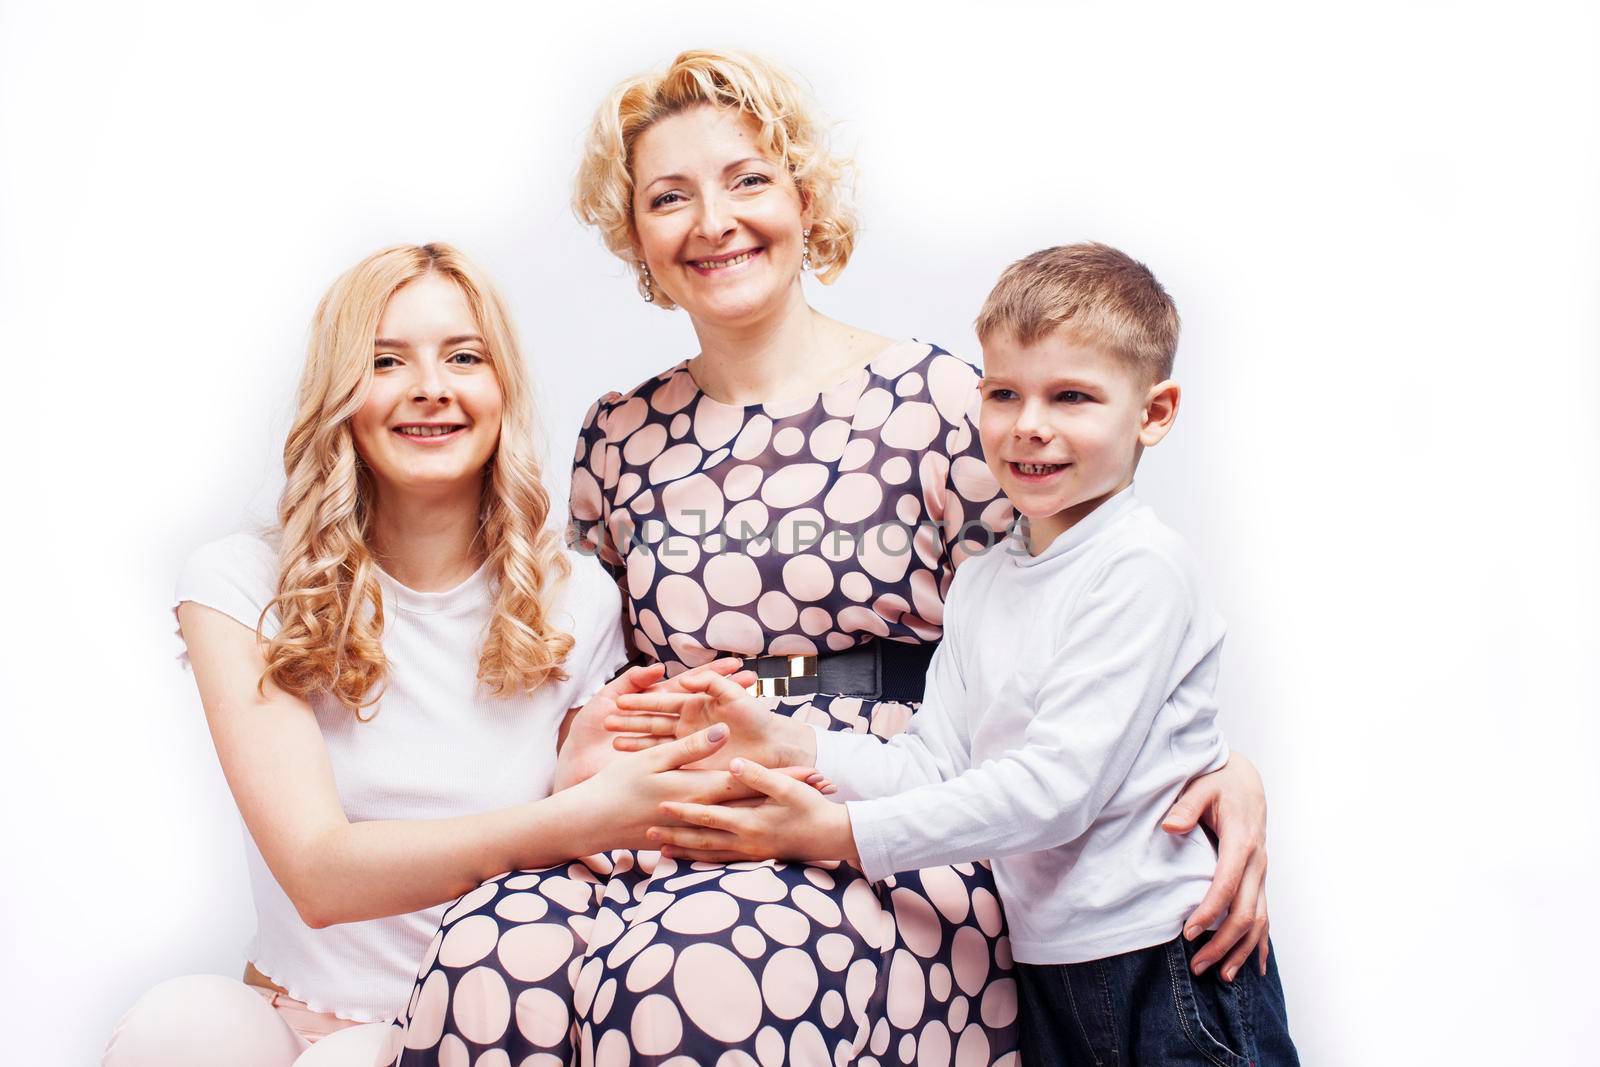 happy smiling blond family together posing cheerful on white background, generation concept. lifestyle people by JordanJ